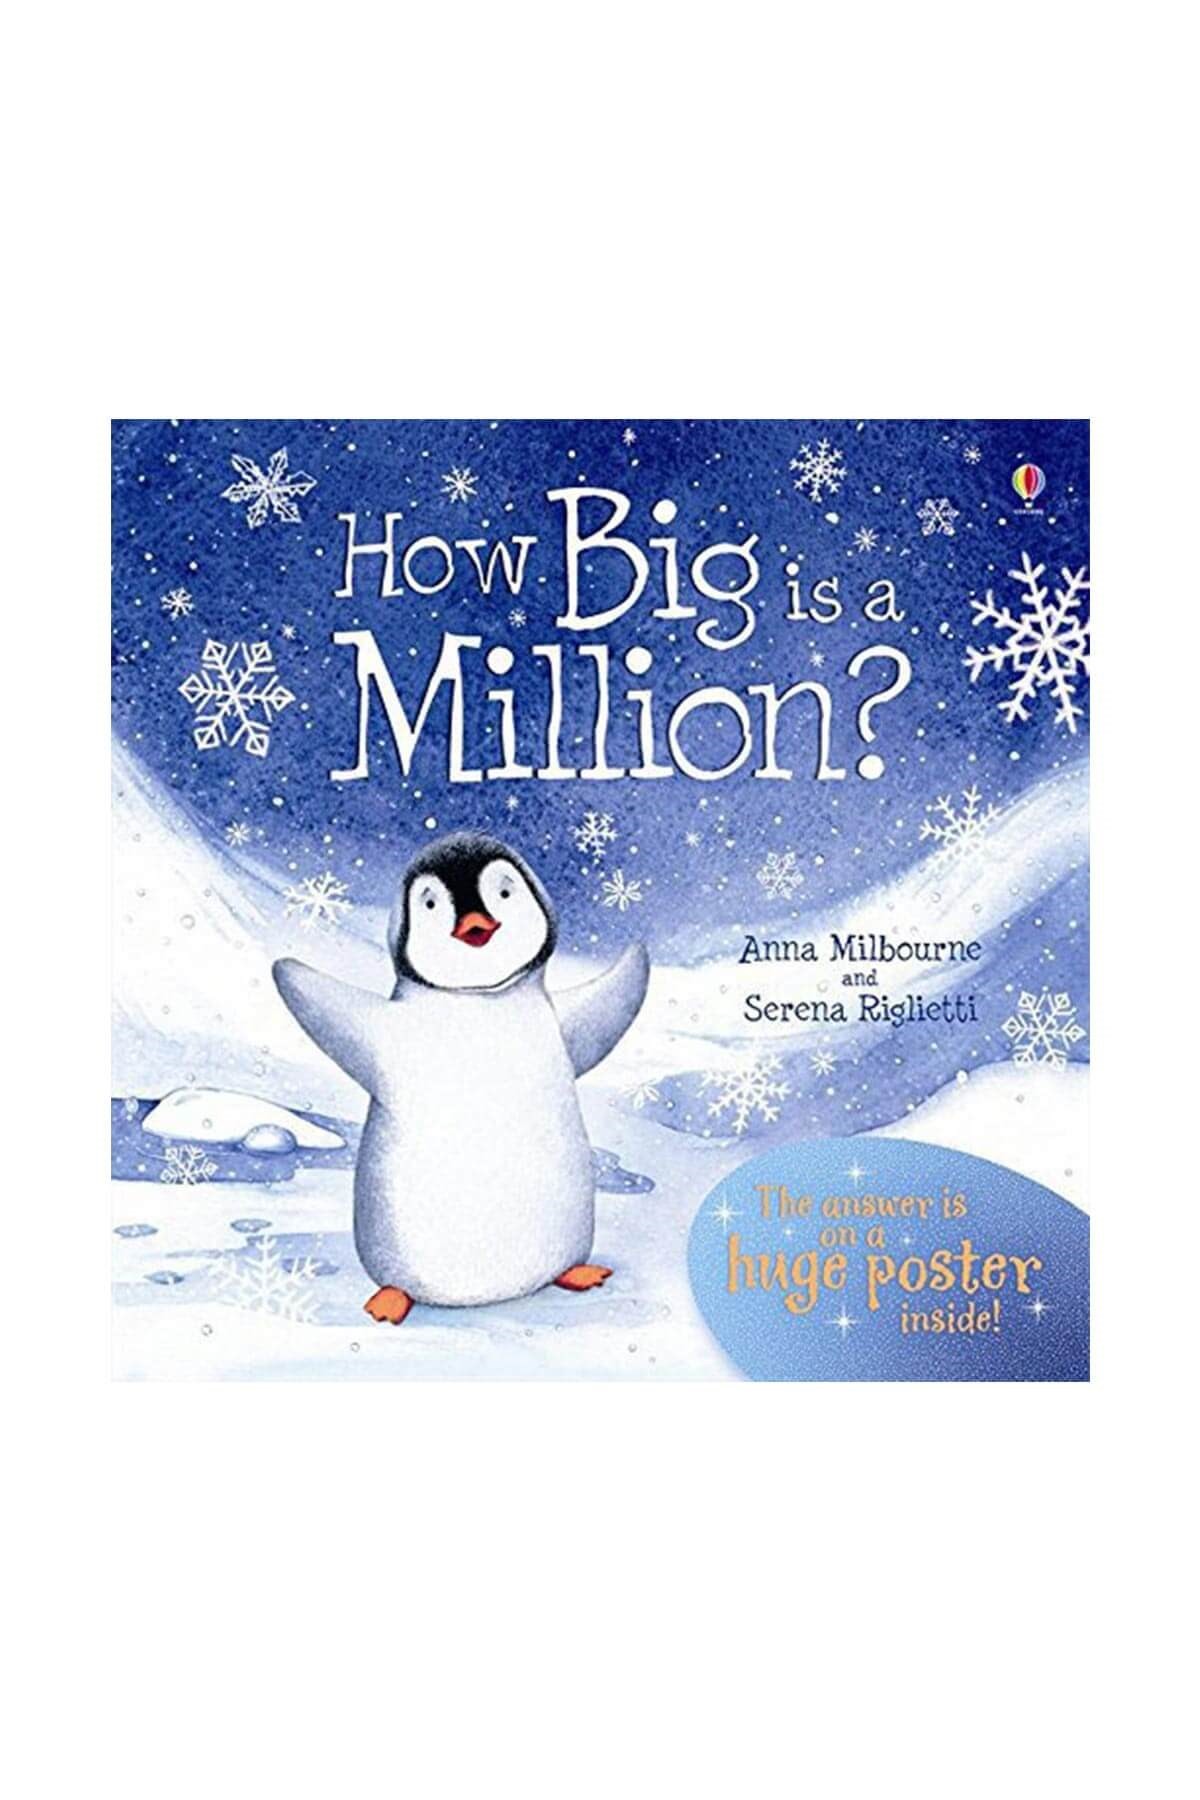 The Usborne Pic How Big is a Million